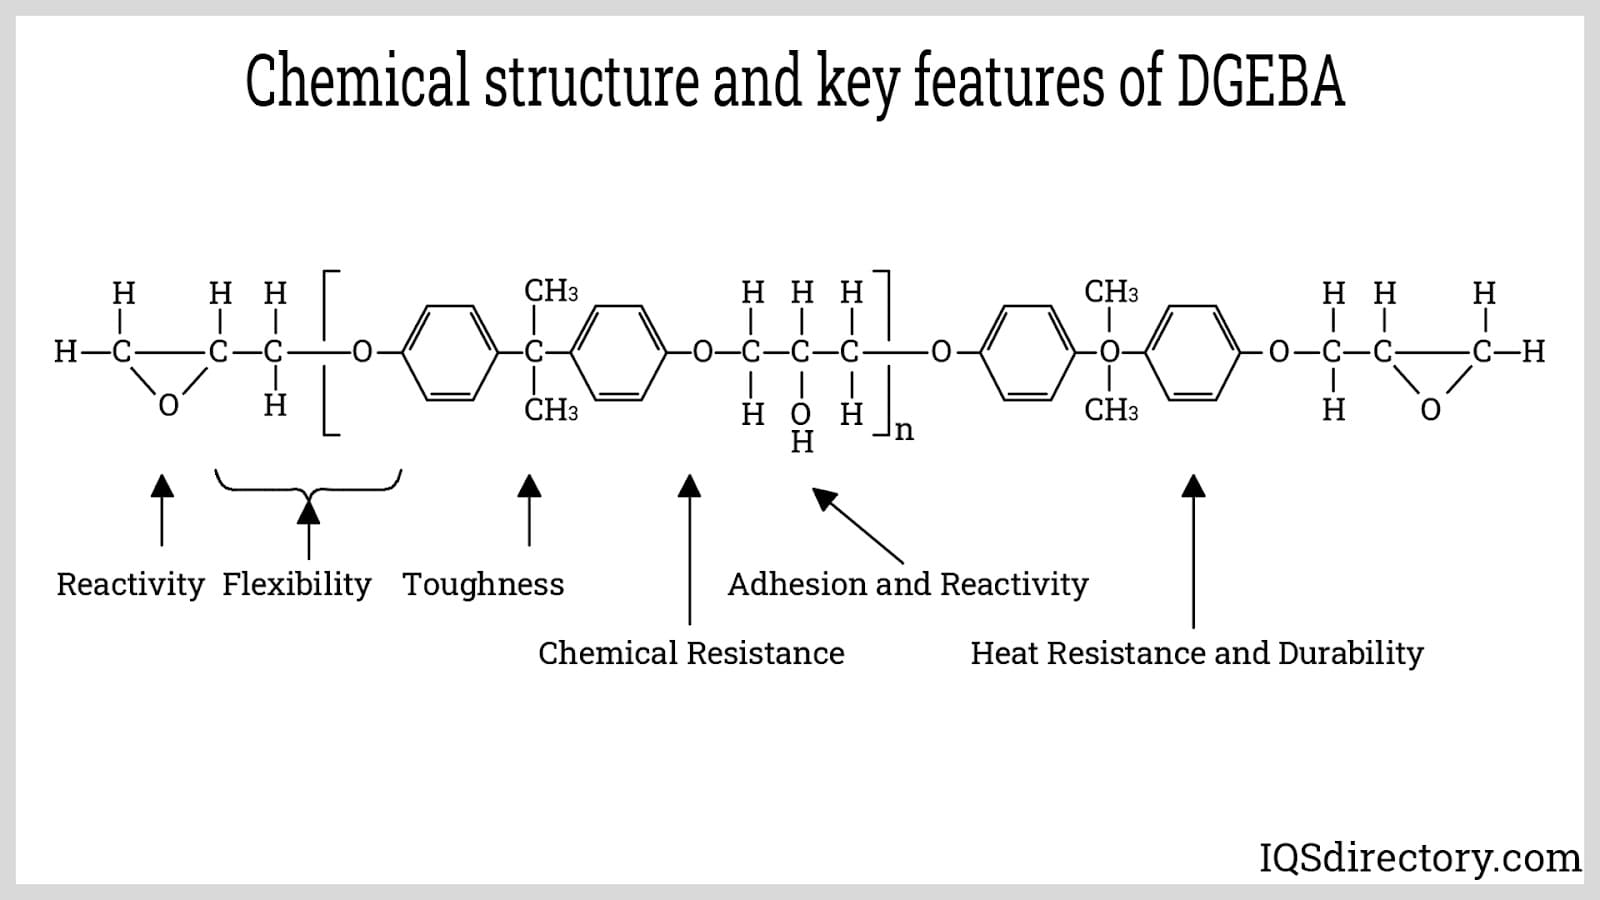 Chemical structure and key features of DGEBA